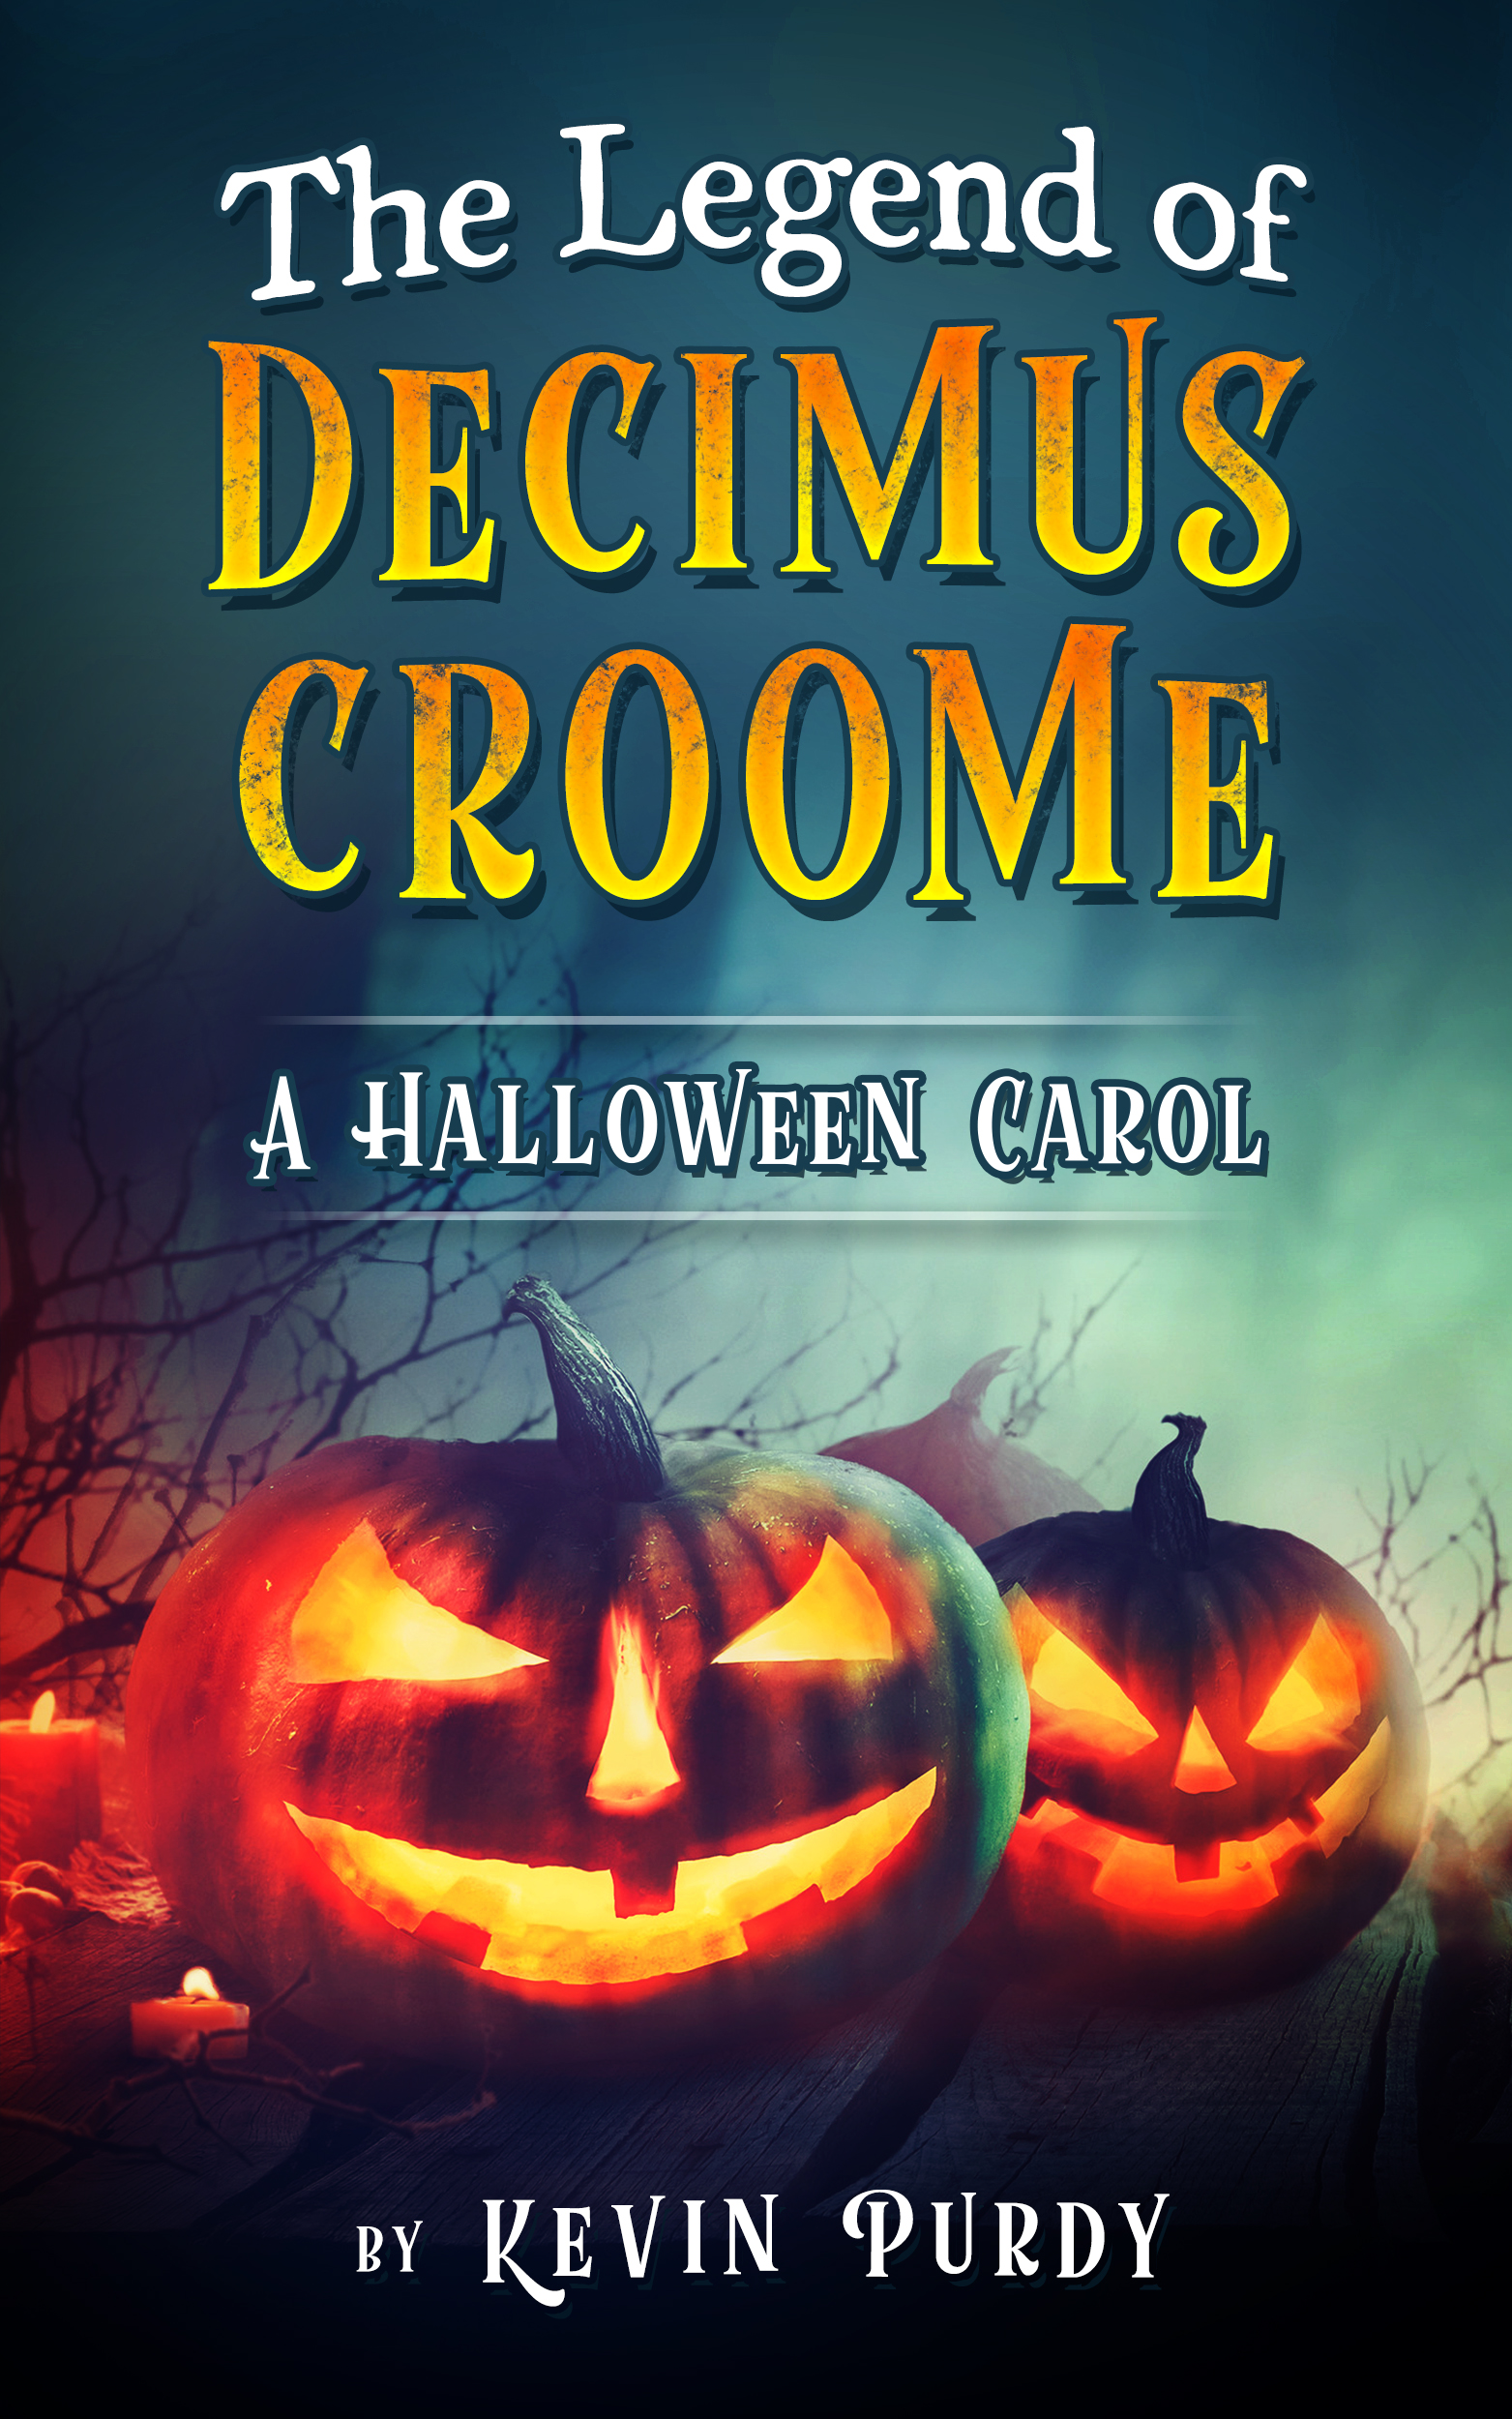 FREE: The Legend of Decimus Croome: A Halloween Carol by Kevin Purdy